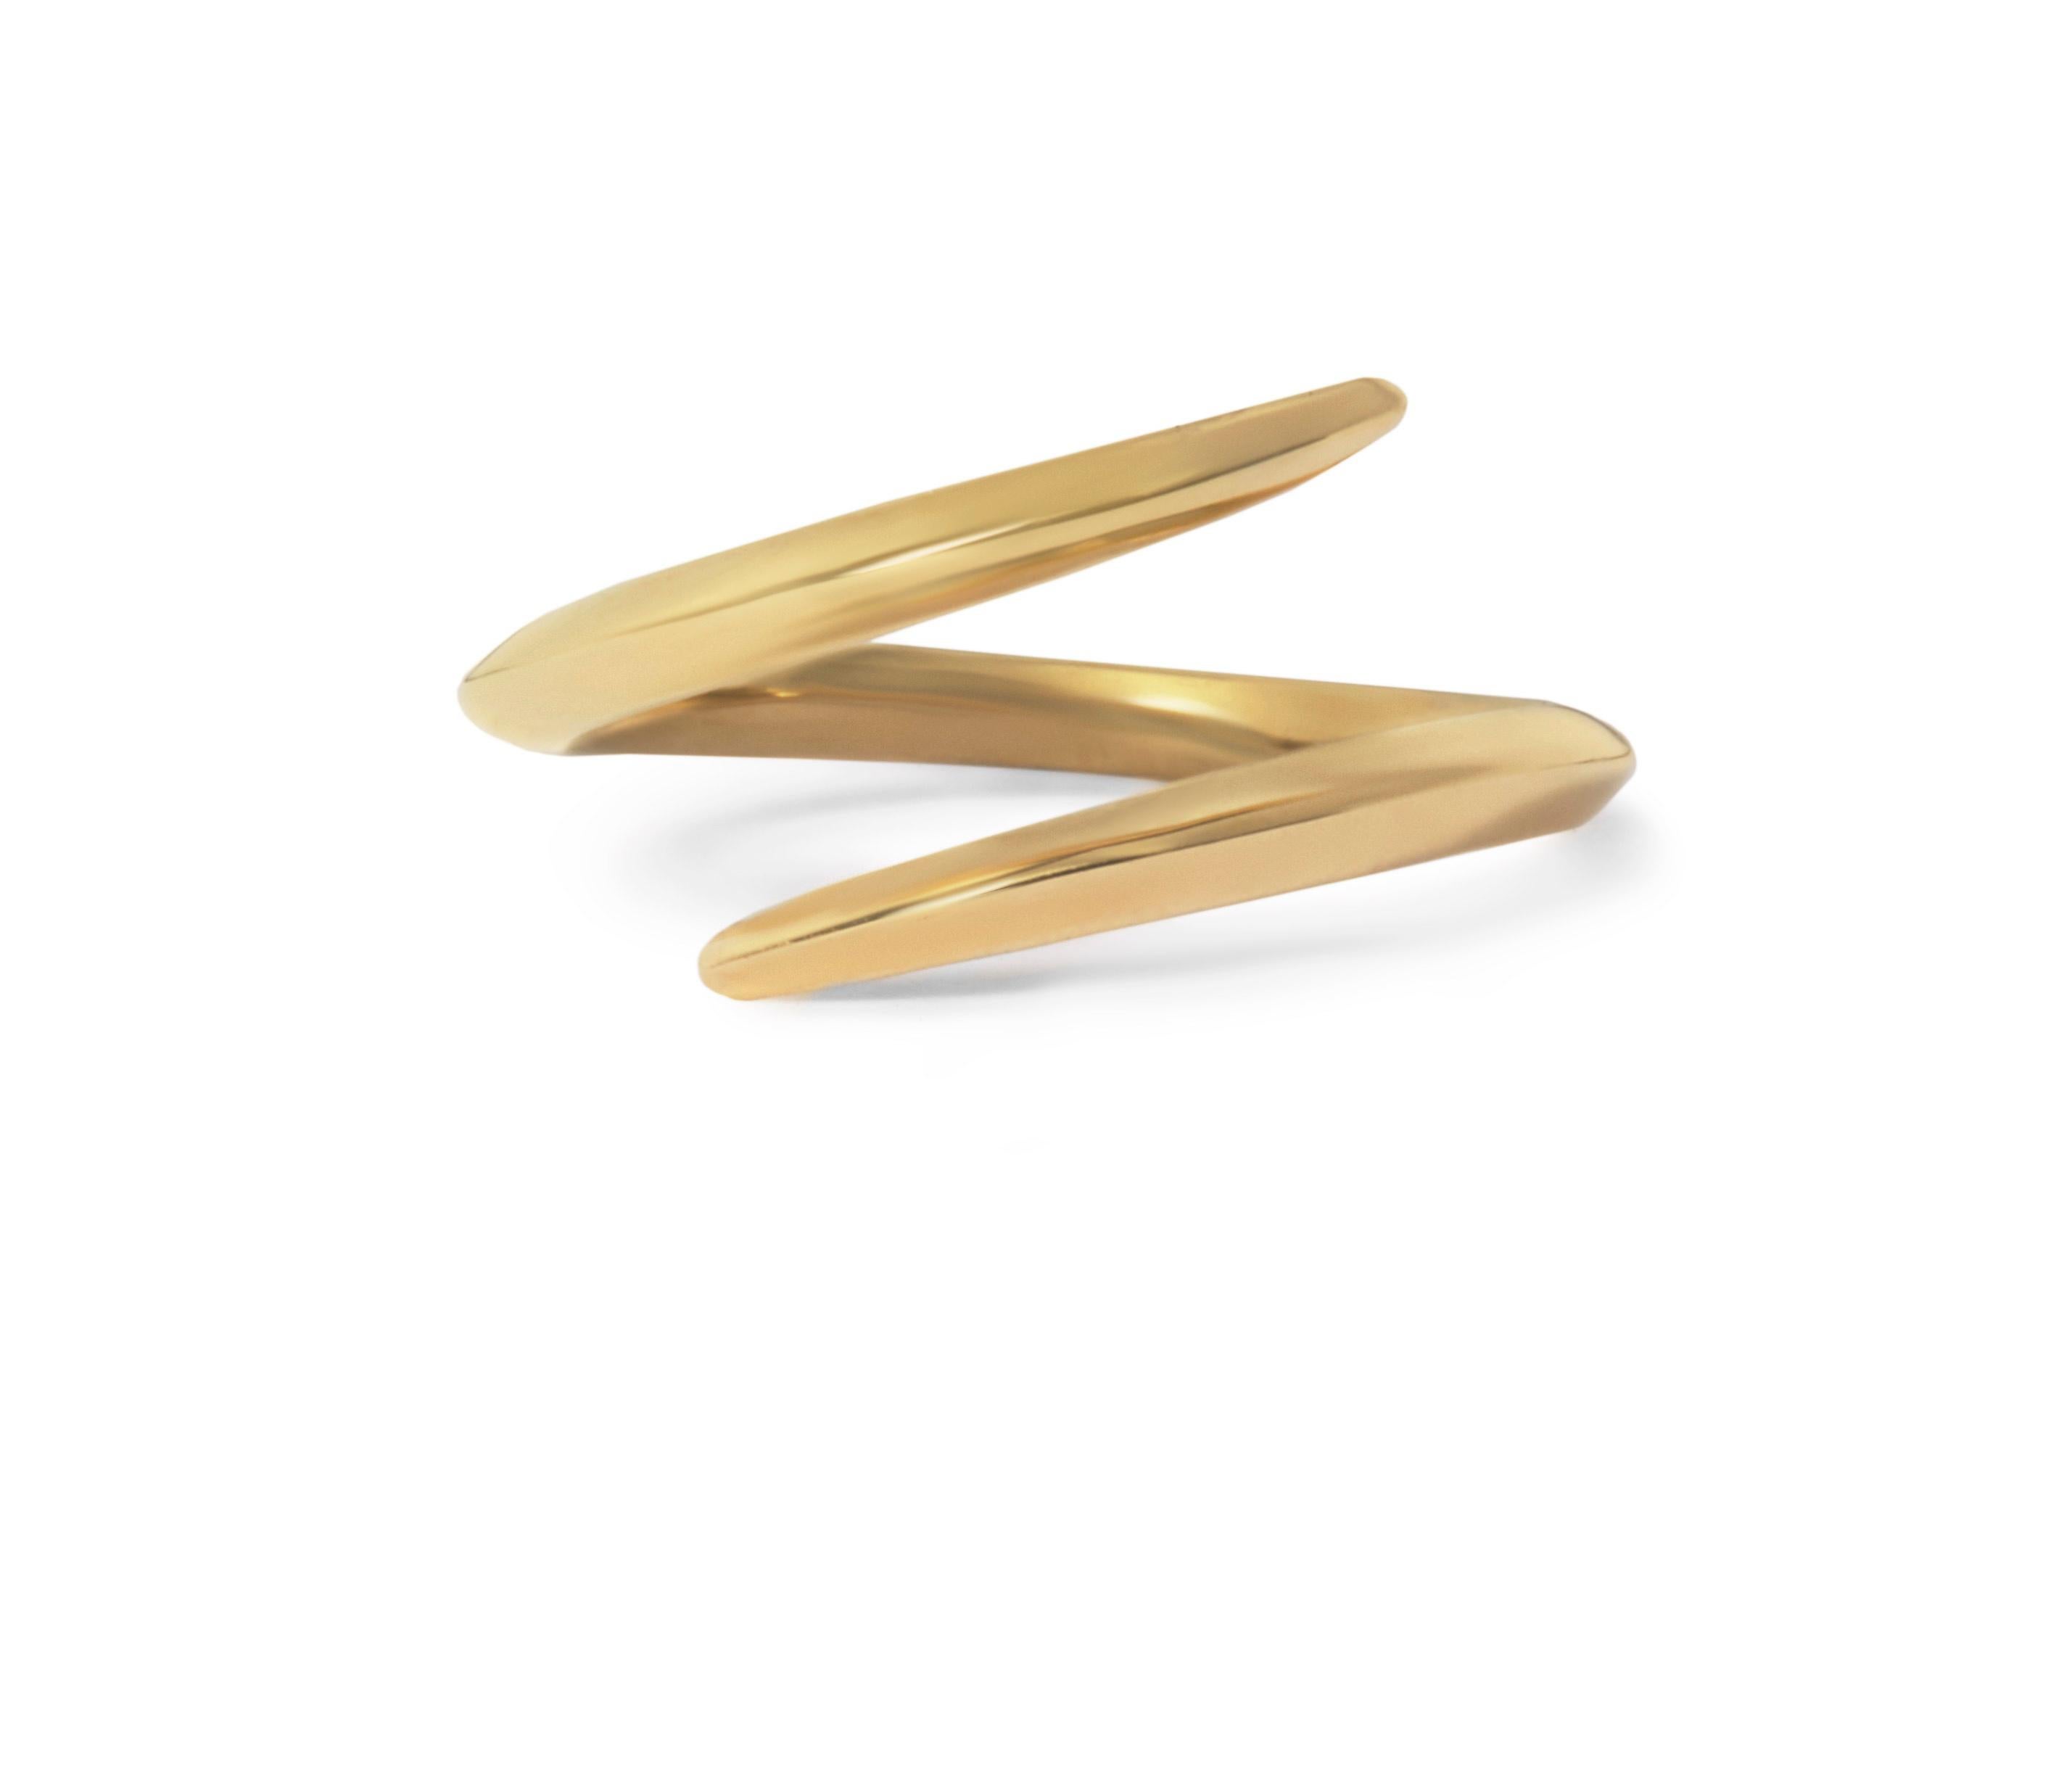 Simple yet unusual, this solid 18-karat gold ring can be worn on its own or stacked with other bands.  The ring curves around the finger and is raised in a subtle, comfortable knife-edge profile for a contemporary take on a moi et toi style.  This